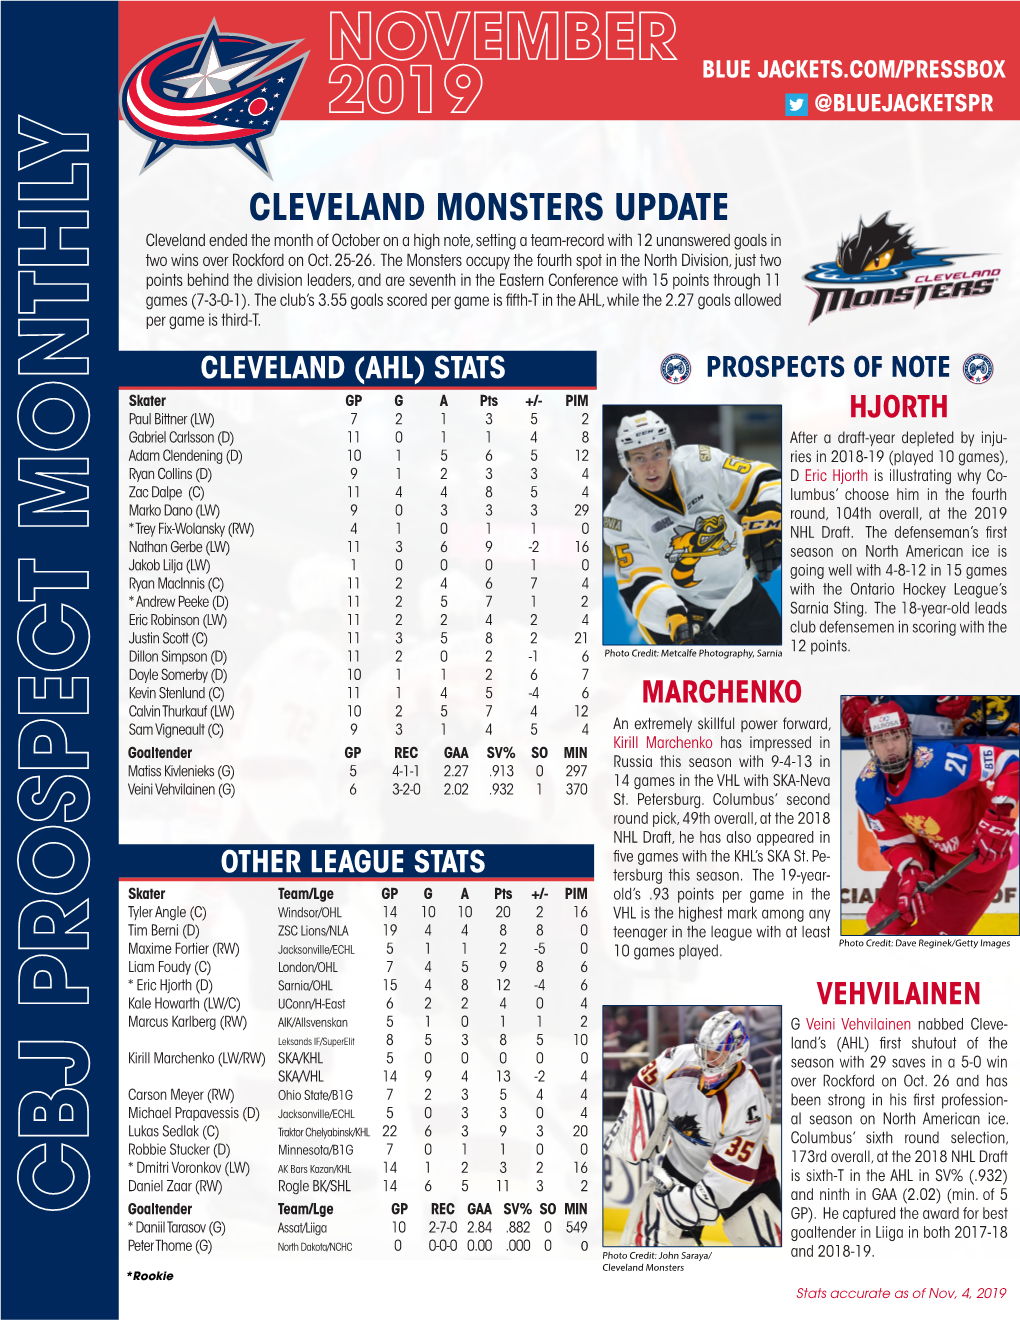 CLEVELAND MONSTERS UPDATE Cleveland Ended the Month of October on a High Note, Setting a Team-Record with 12 Unanswered Goals in Two Wins Over Rockford on Oct